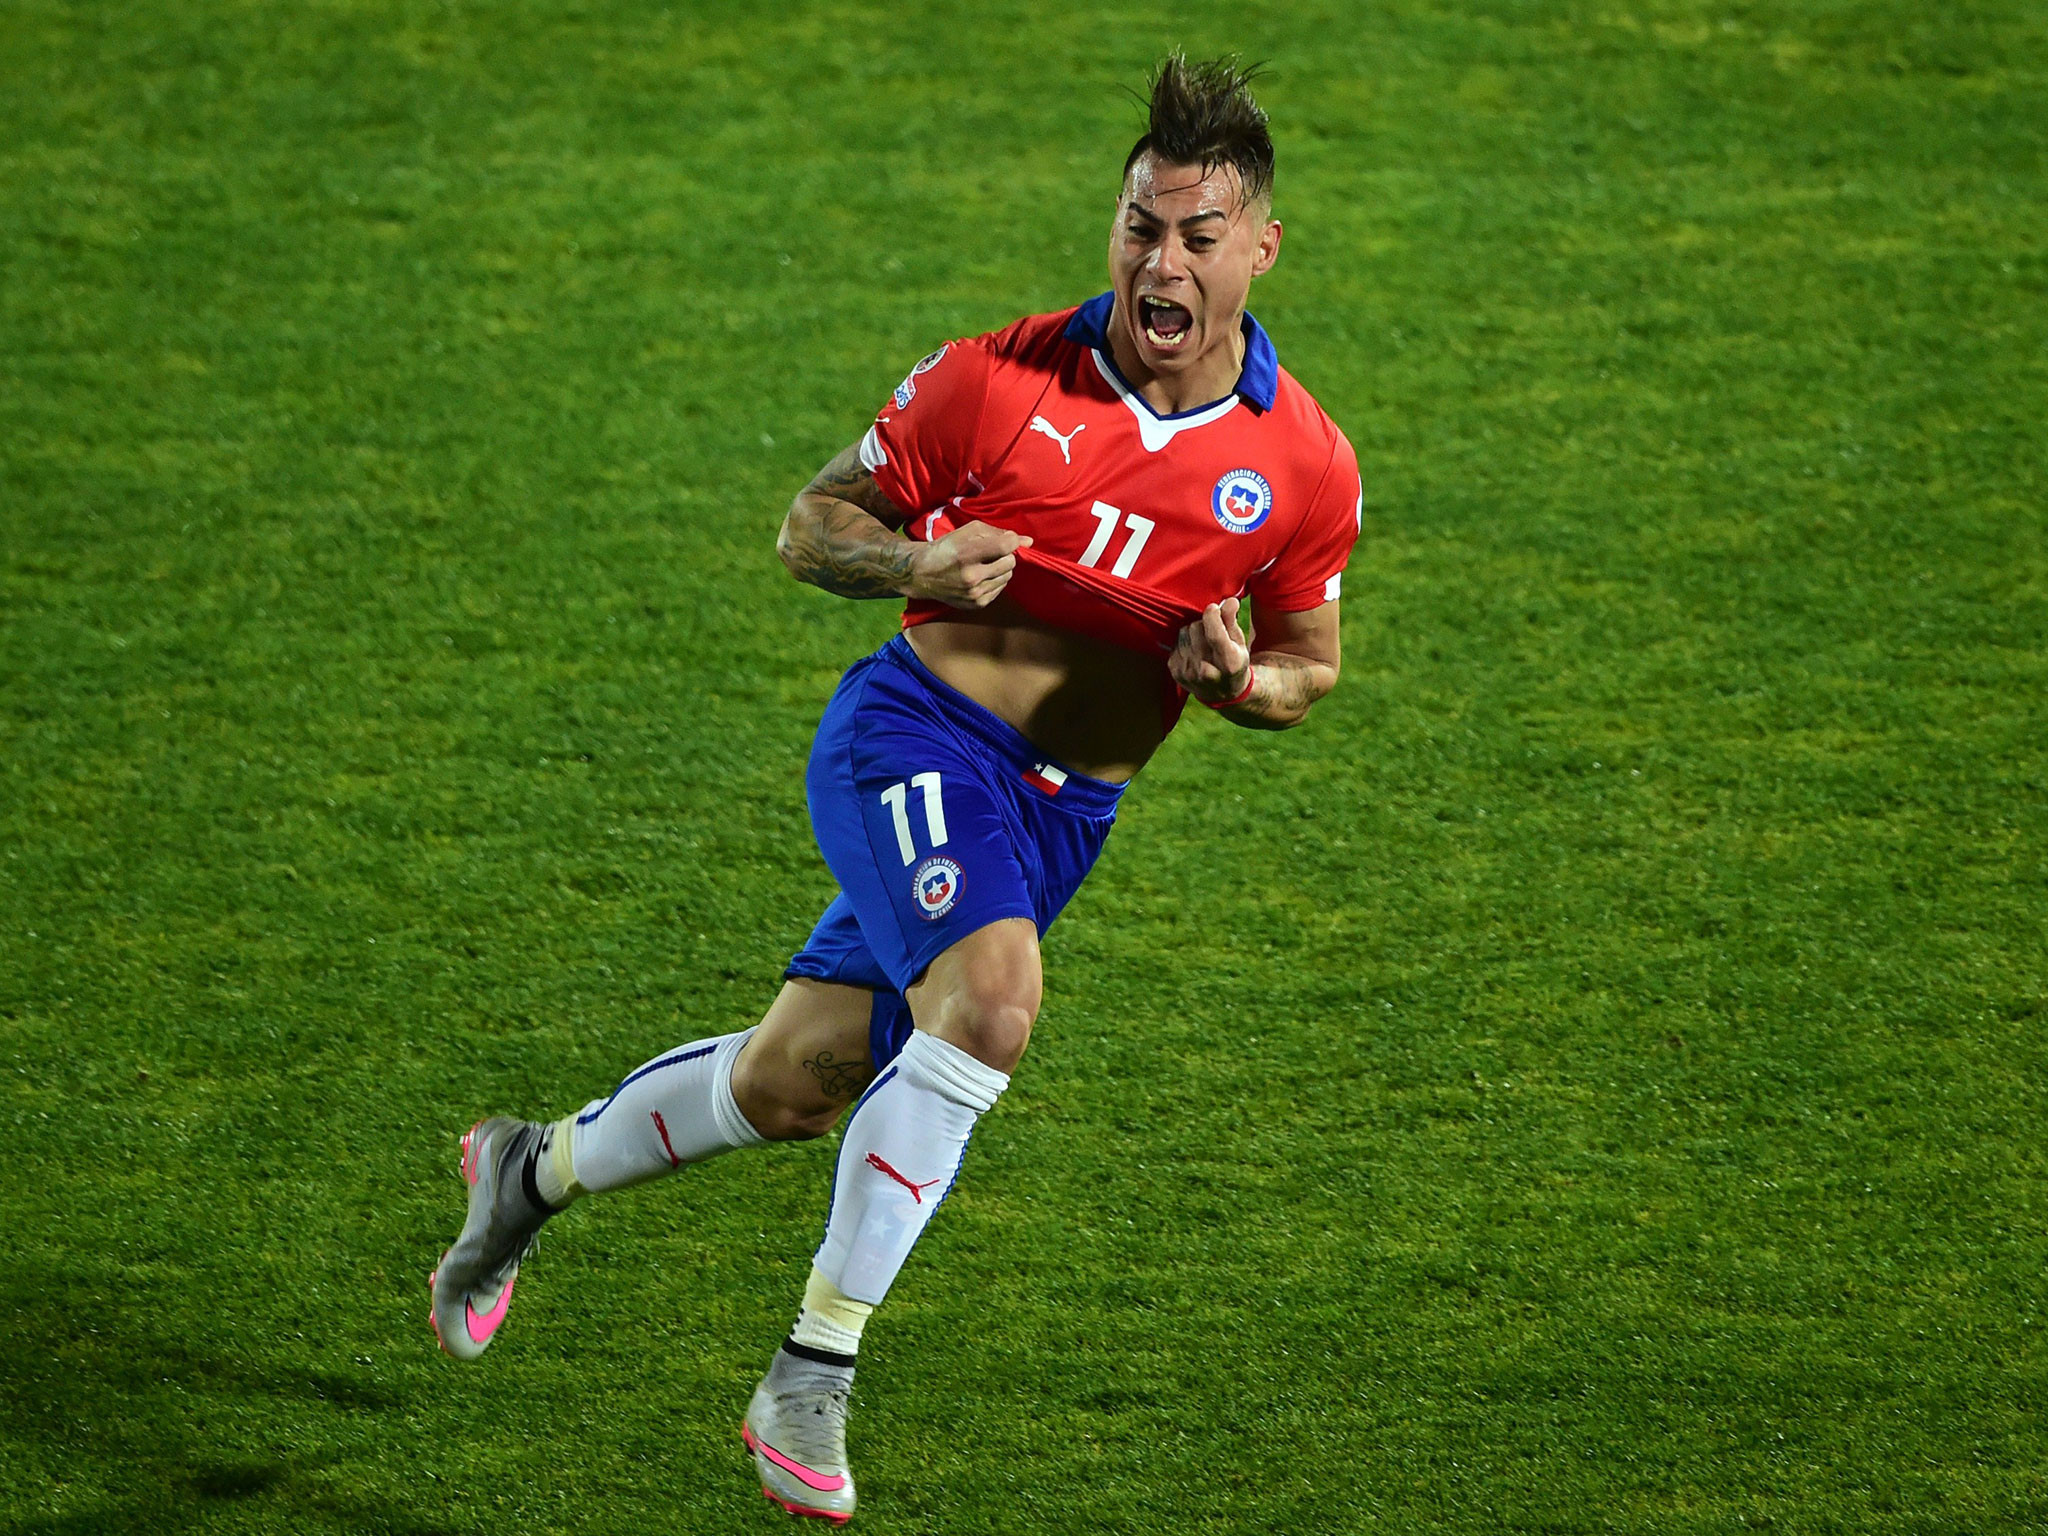 2048x1536 Copa America 2015: Chile vs Peru match report - Eduardo Vargas double fires  hosts in final after seeing off 10-man Peru | The Independent